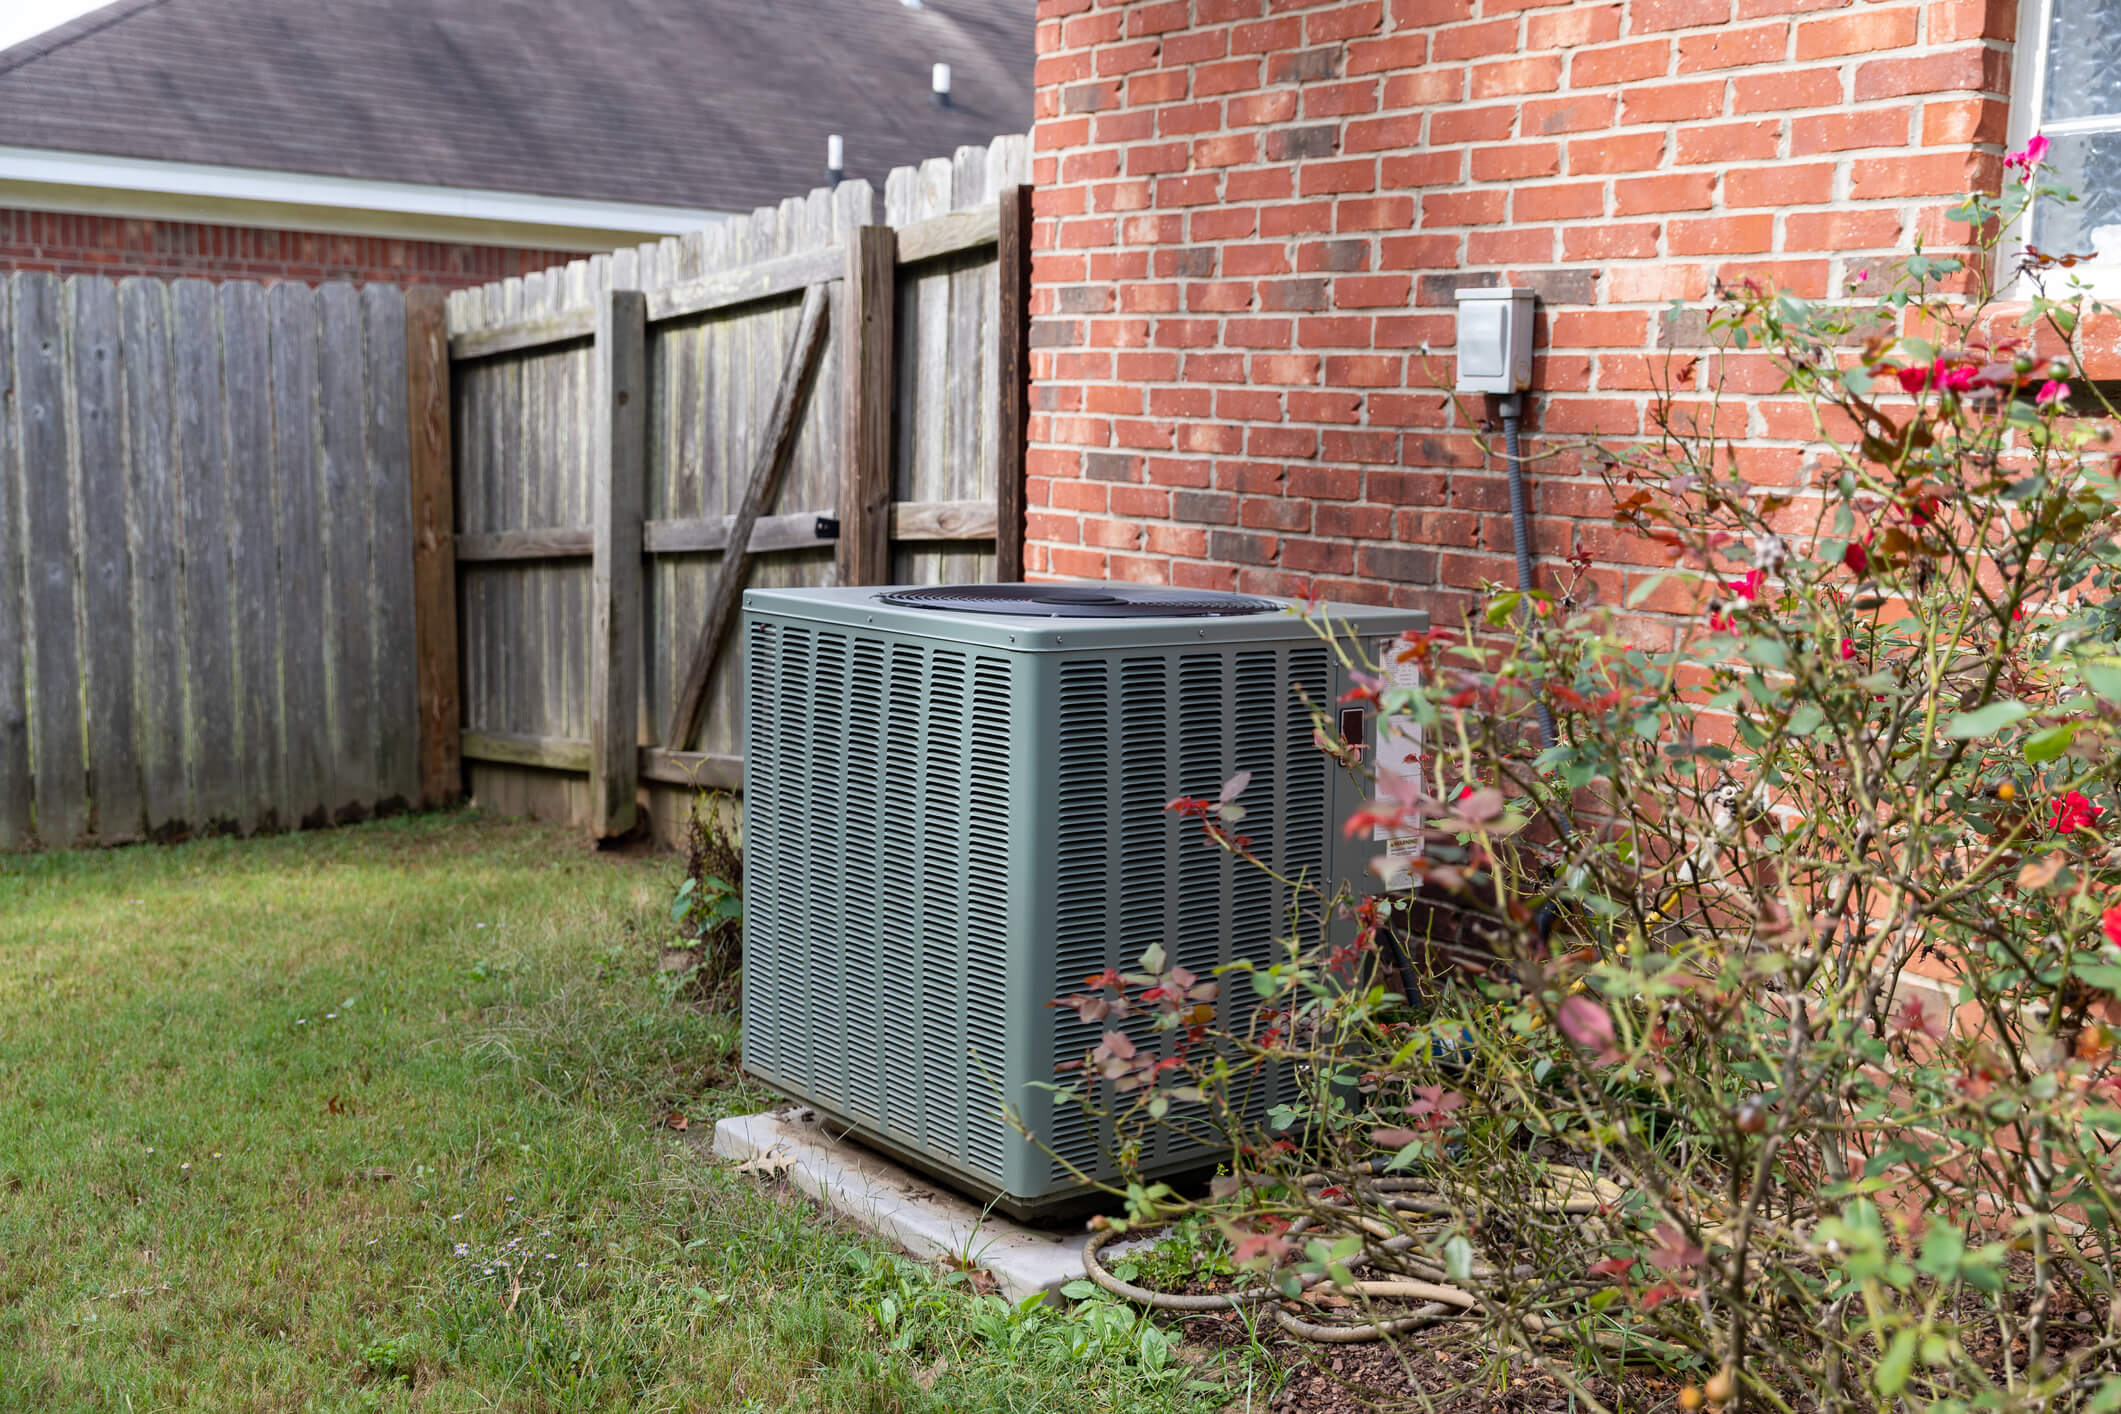 An air conditioning unit in the backyard of a brick house